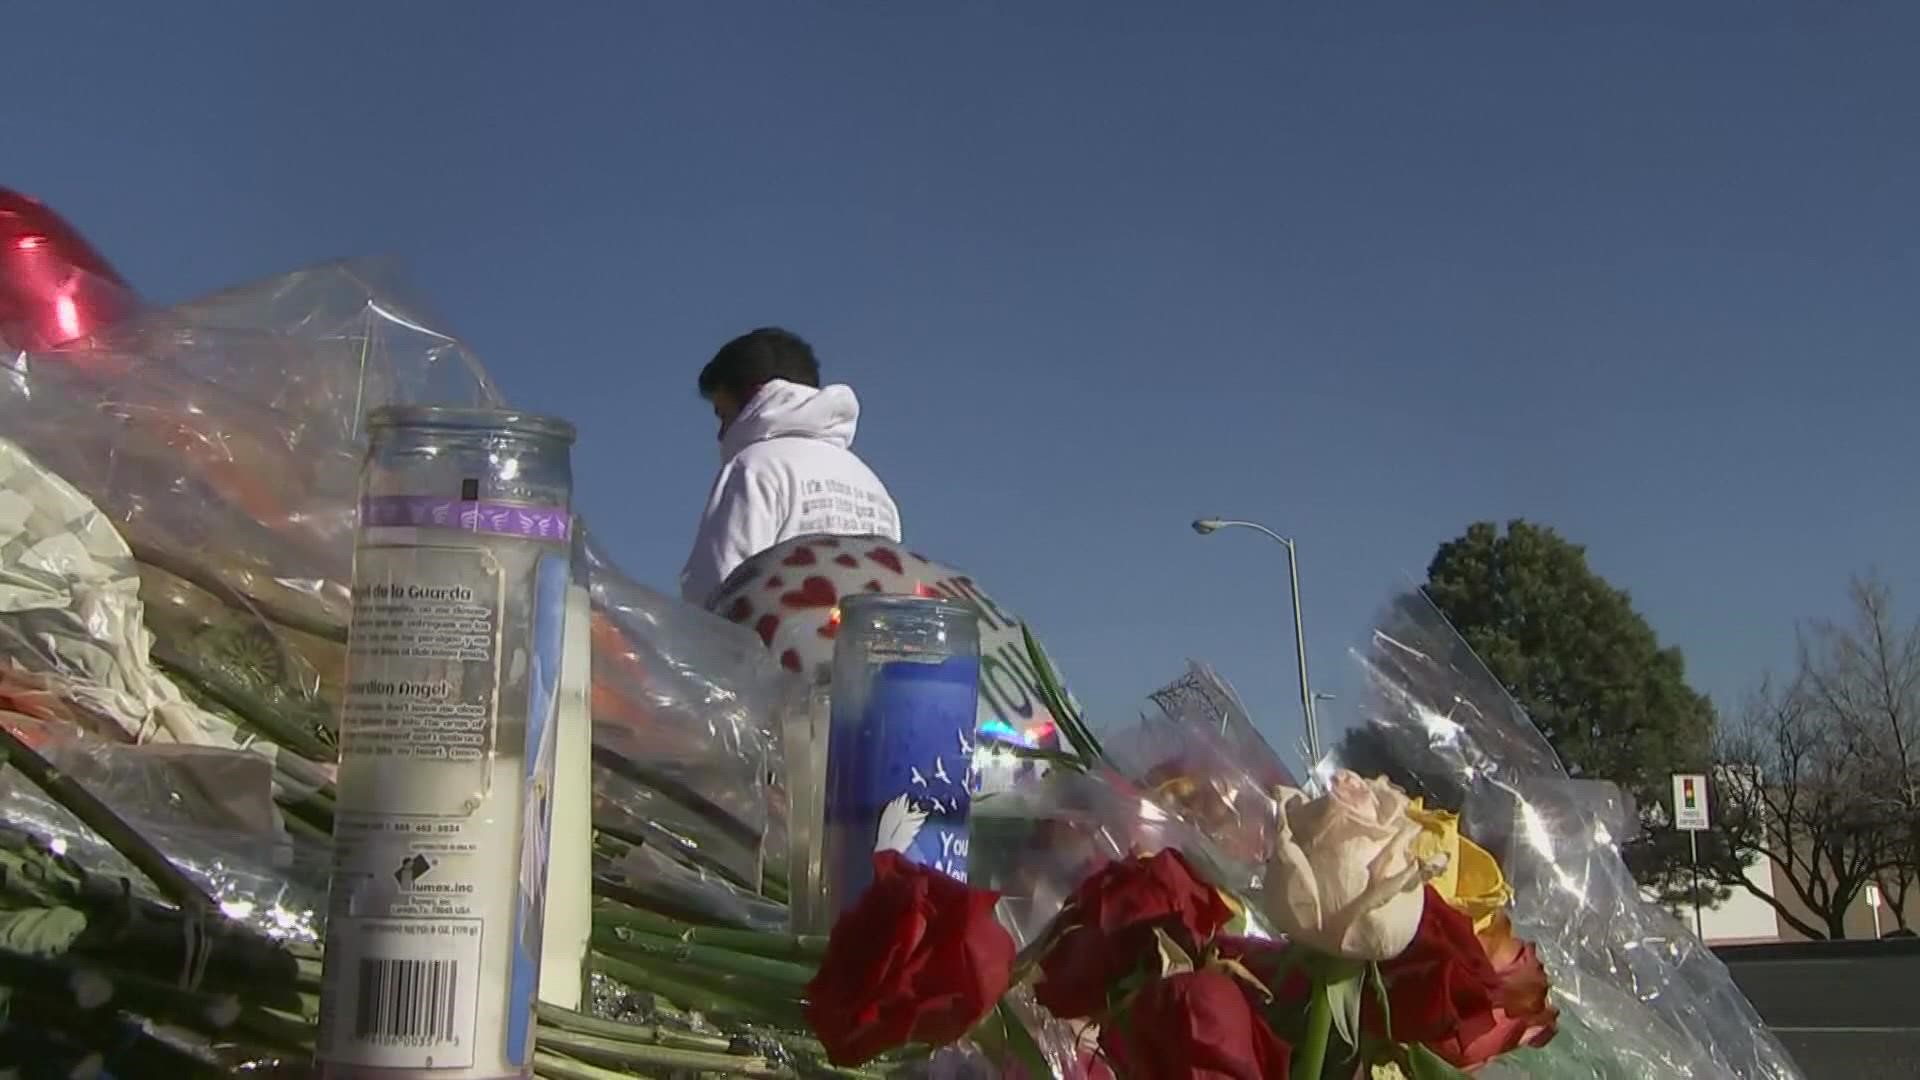 The shooting has left many people fearing for their safety, but local organizations encourage people to stay strong.